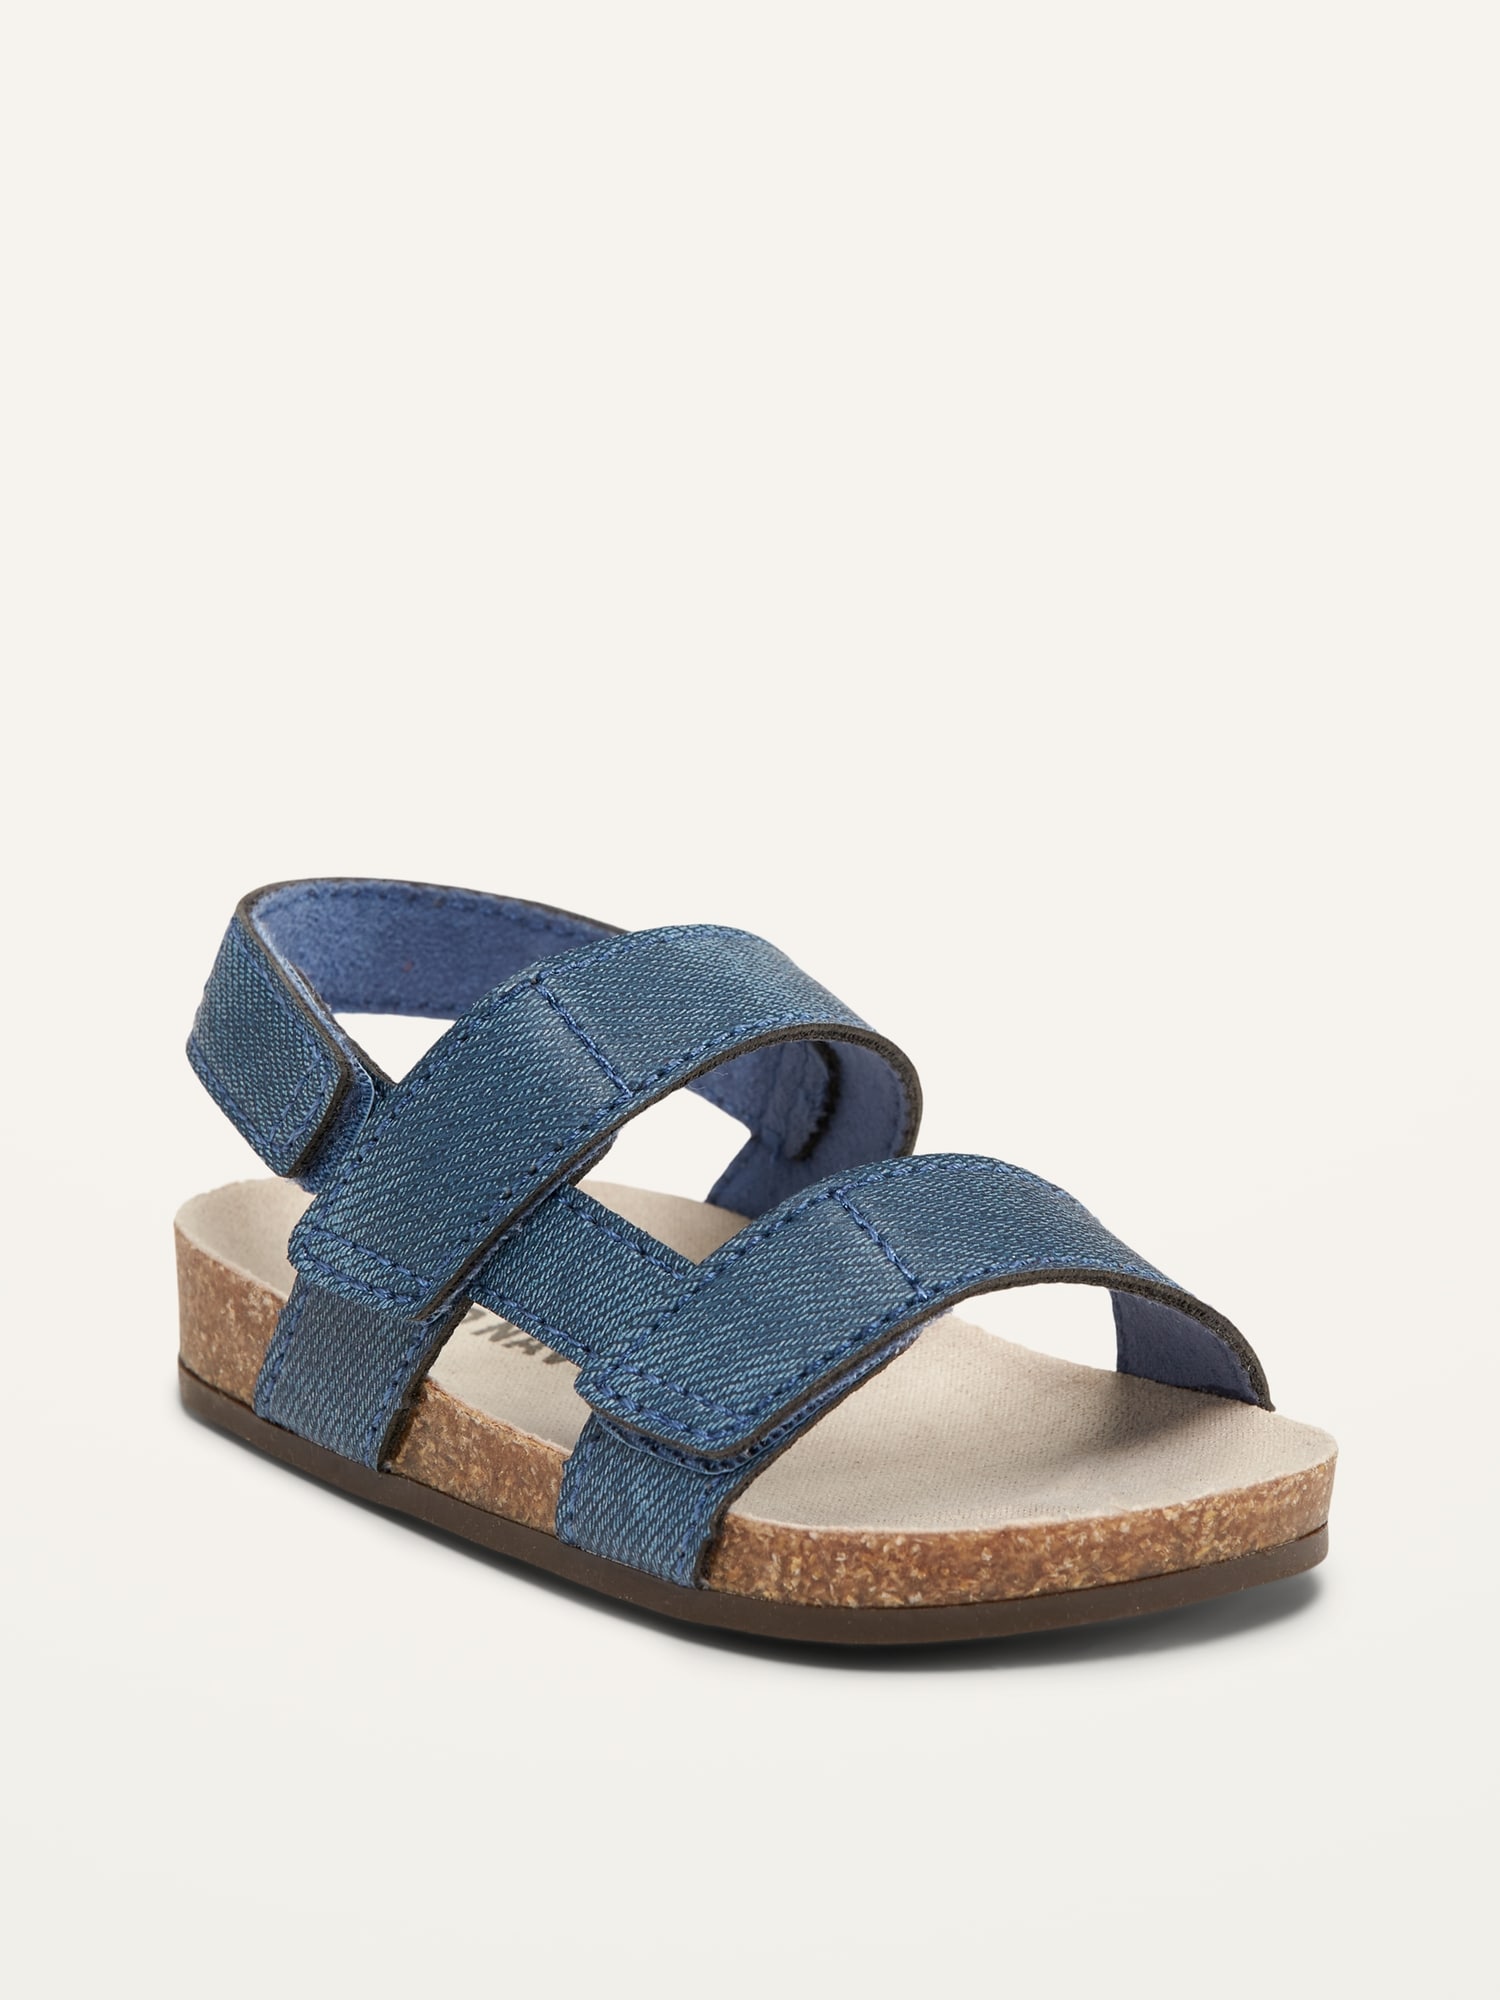 Oldnavy Unisex Chambray Double-Strap Sandals for Baby